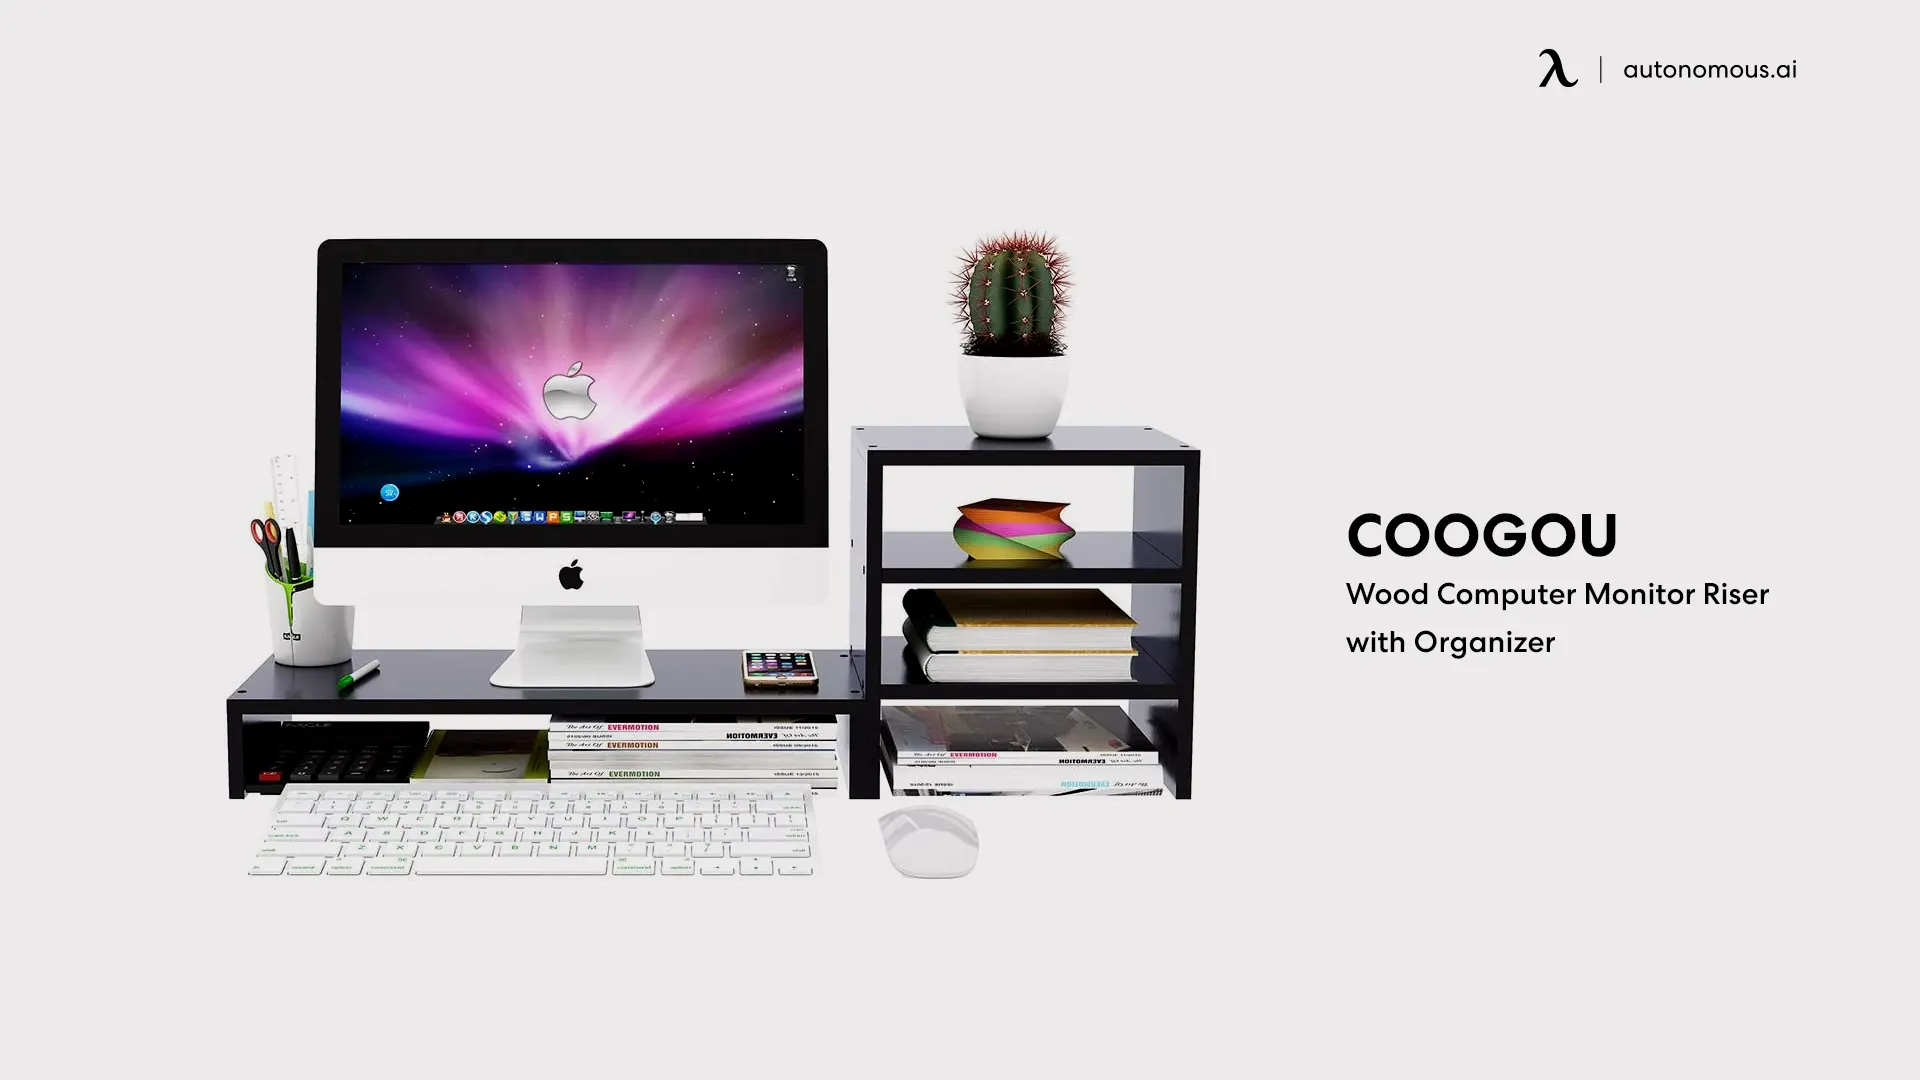 Wood Computer Monitor Riser with Organizer by COOGOU